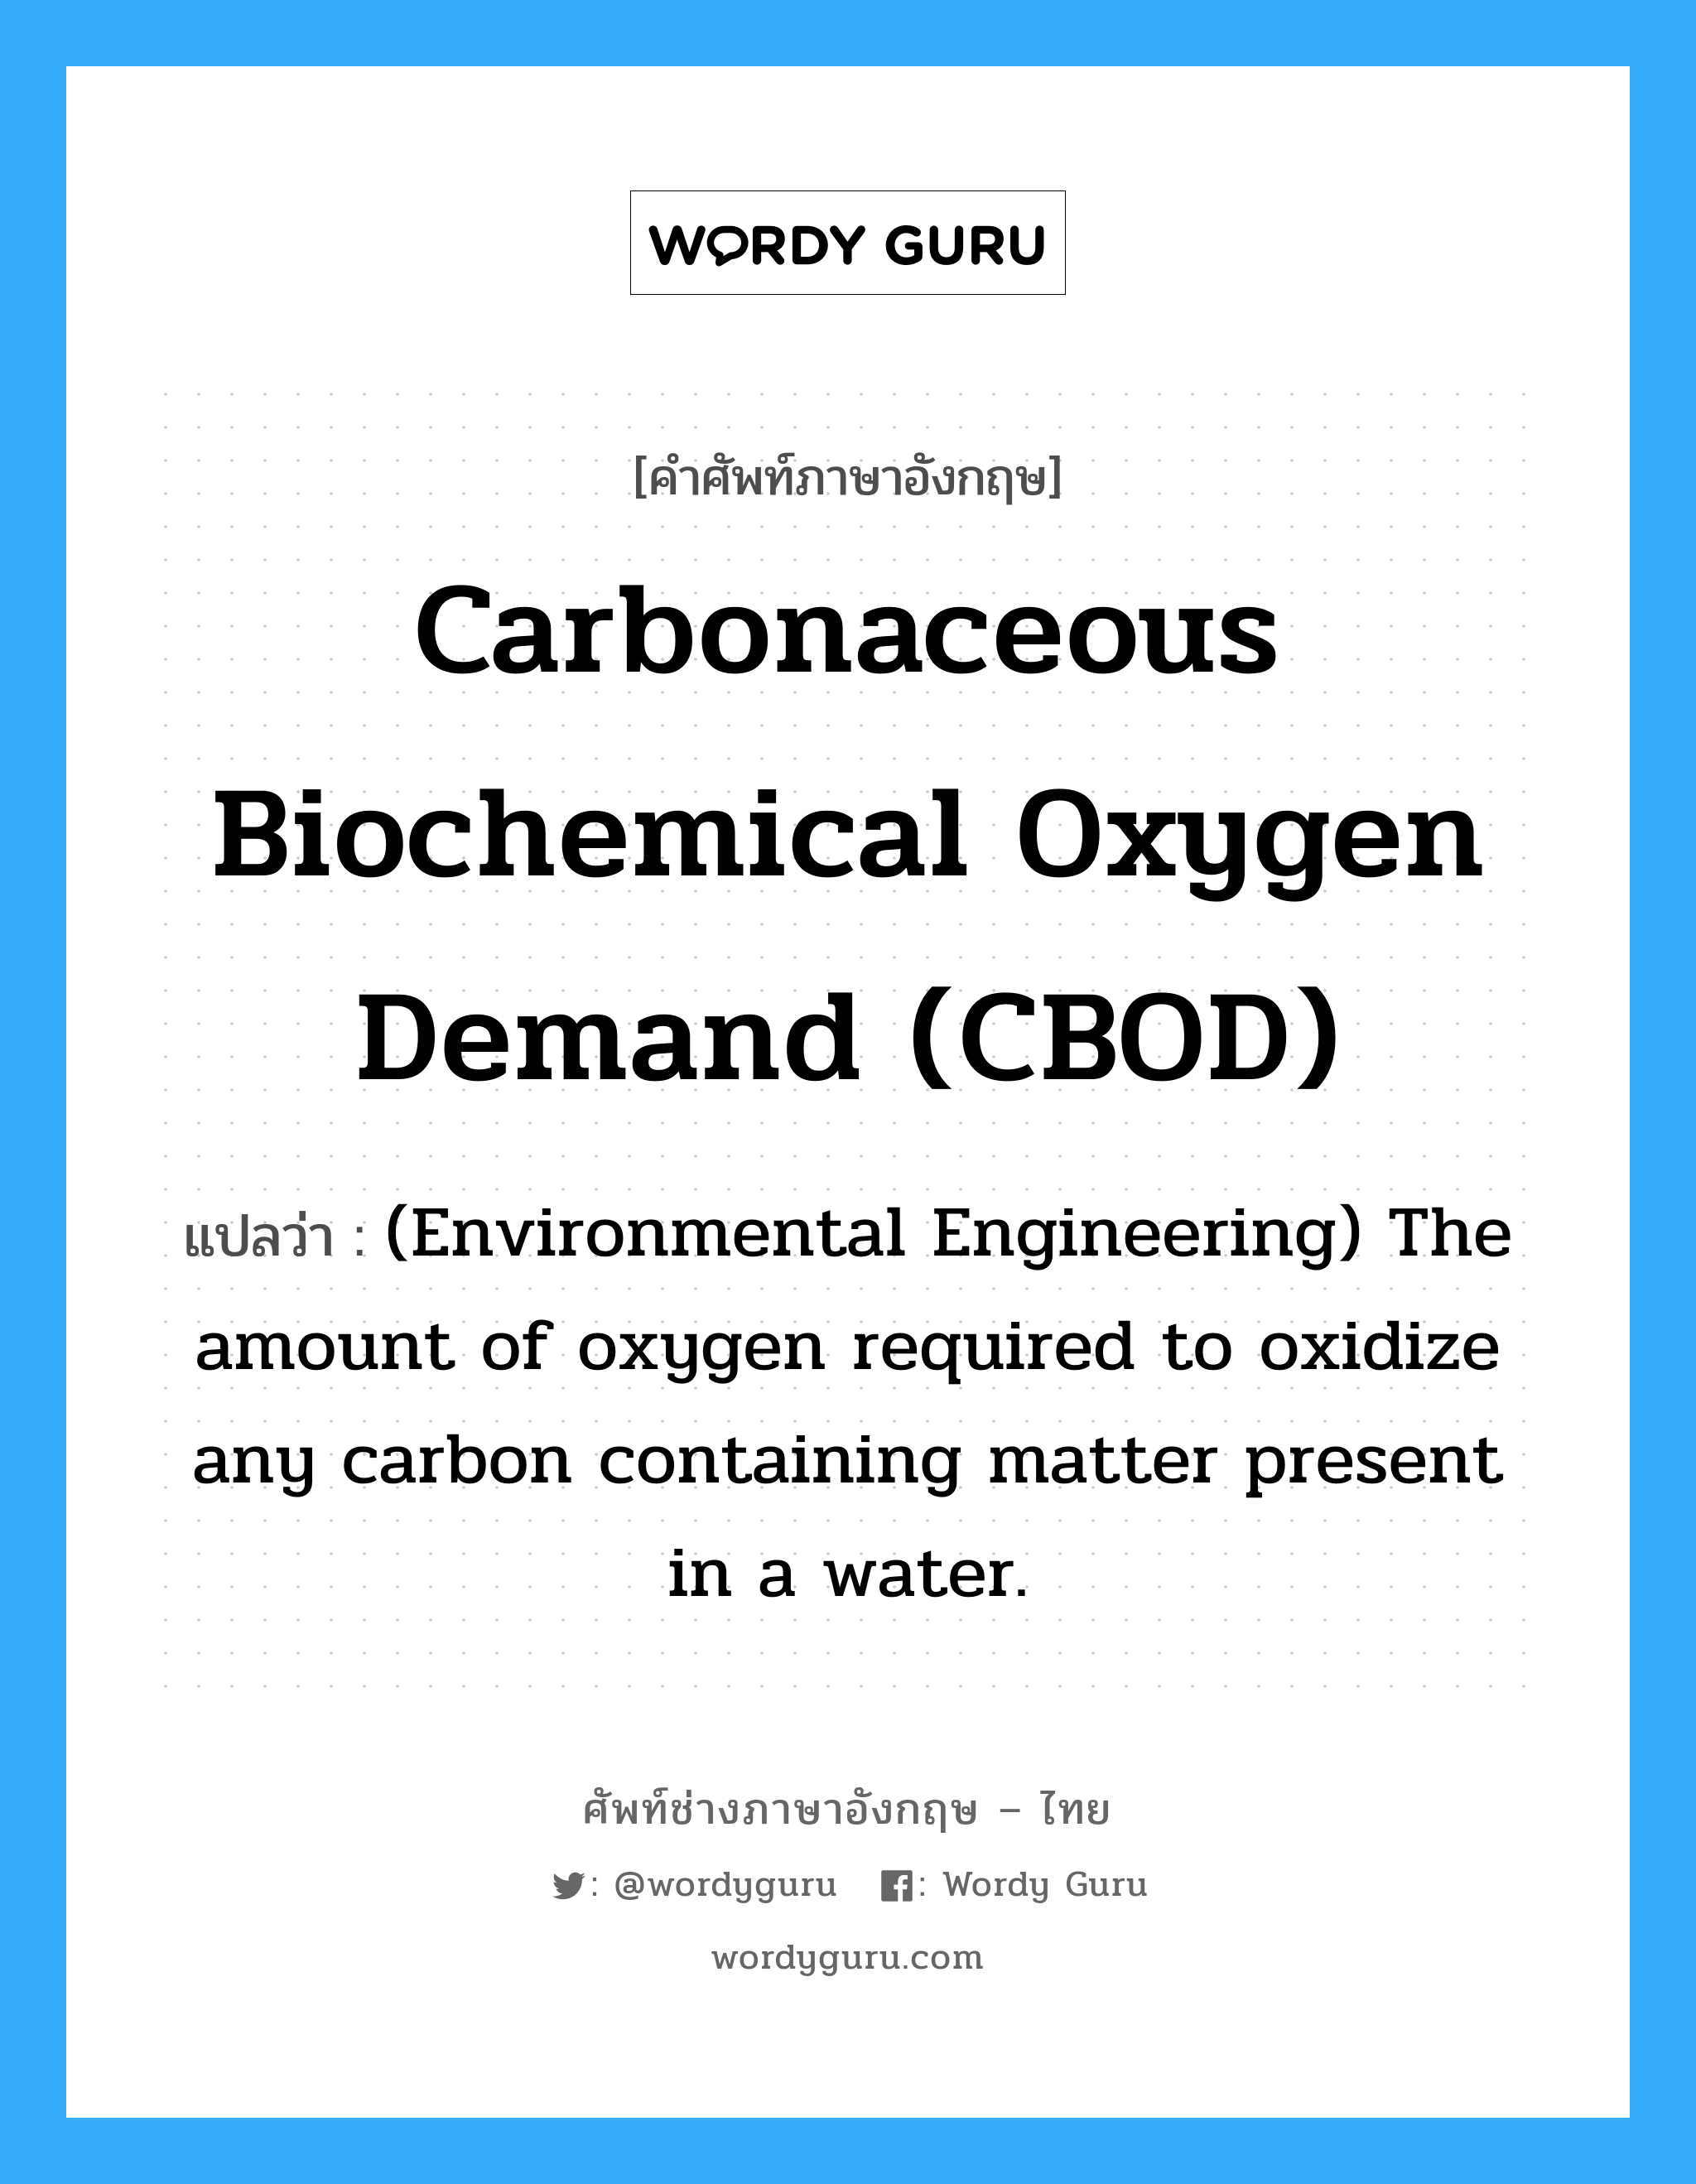 Carbonaceous biochemical oxygen demand (CBOD) แปลว่า?, คำศัพท์ช่างภาษาอังกฤษ - ไทย Carbonaceous biochemical oxygen demand (CBOD) คำศัพท์ภาษาอังกฤษ Carbonaceous biochemical oxygen demand (CBOD) แปลว่า (Environmental Engineering) The amount of oxygen required to oxidize any carbon containing matter present in a water.